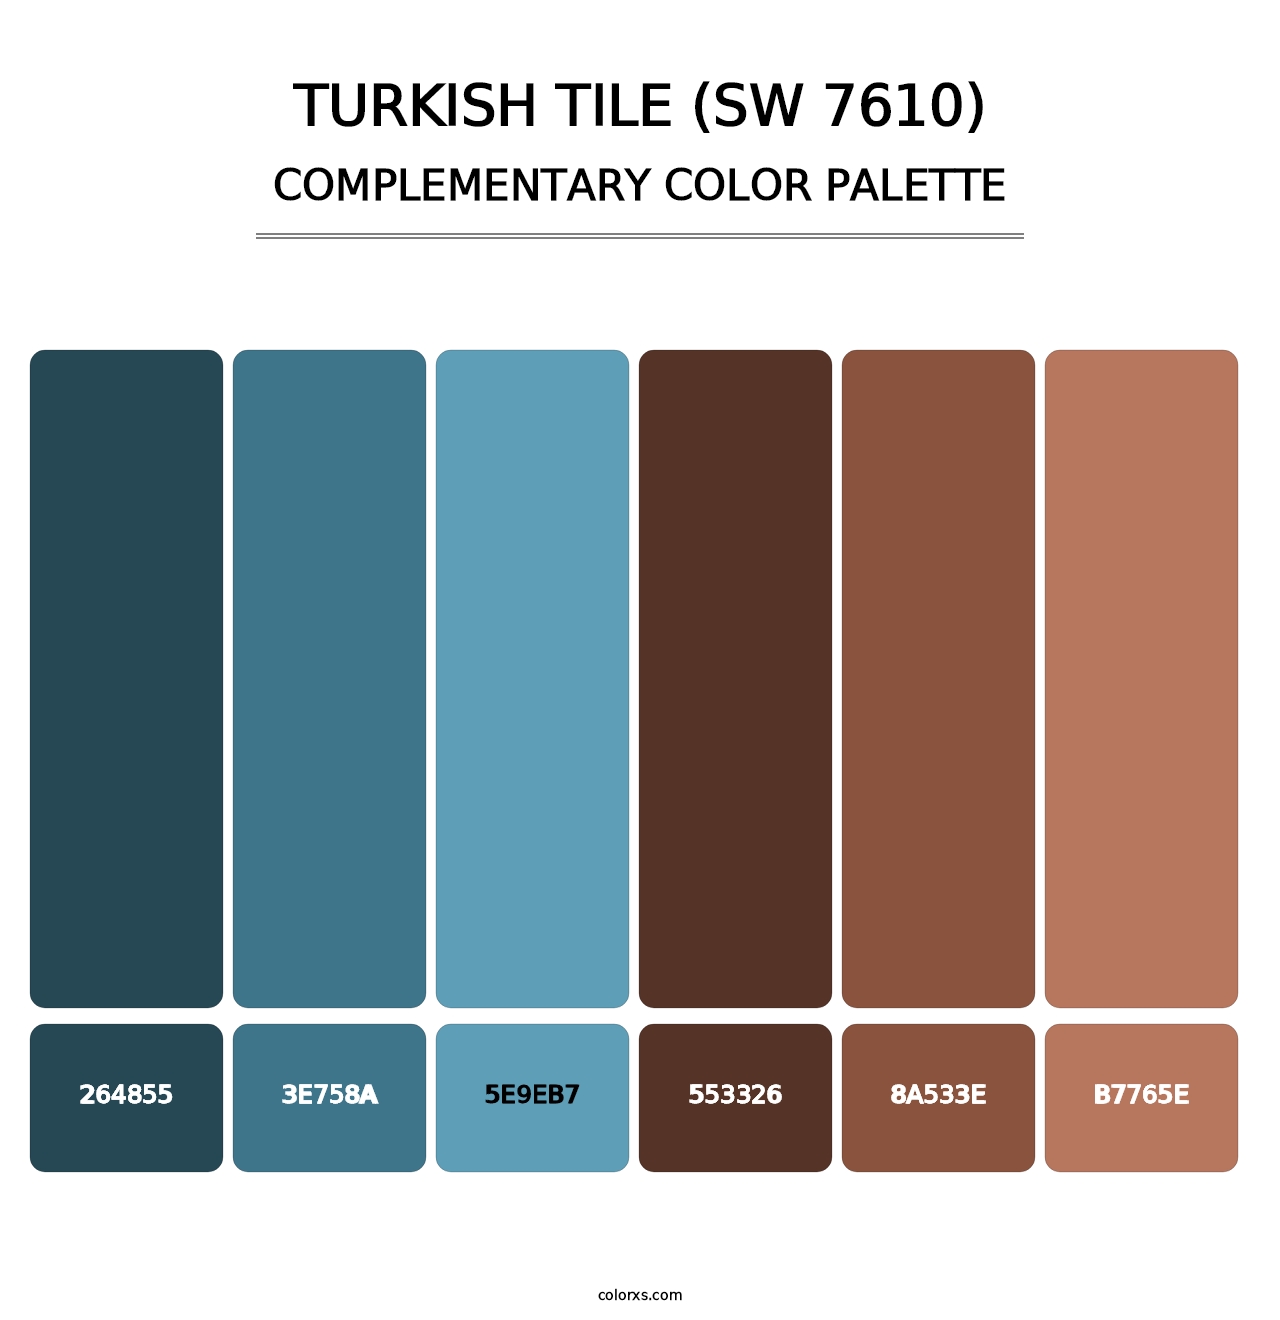 Turkish Tile (SW 7610) - Complementary Color Palette